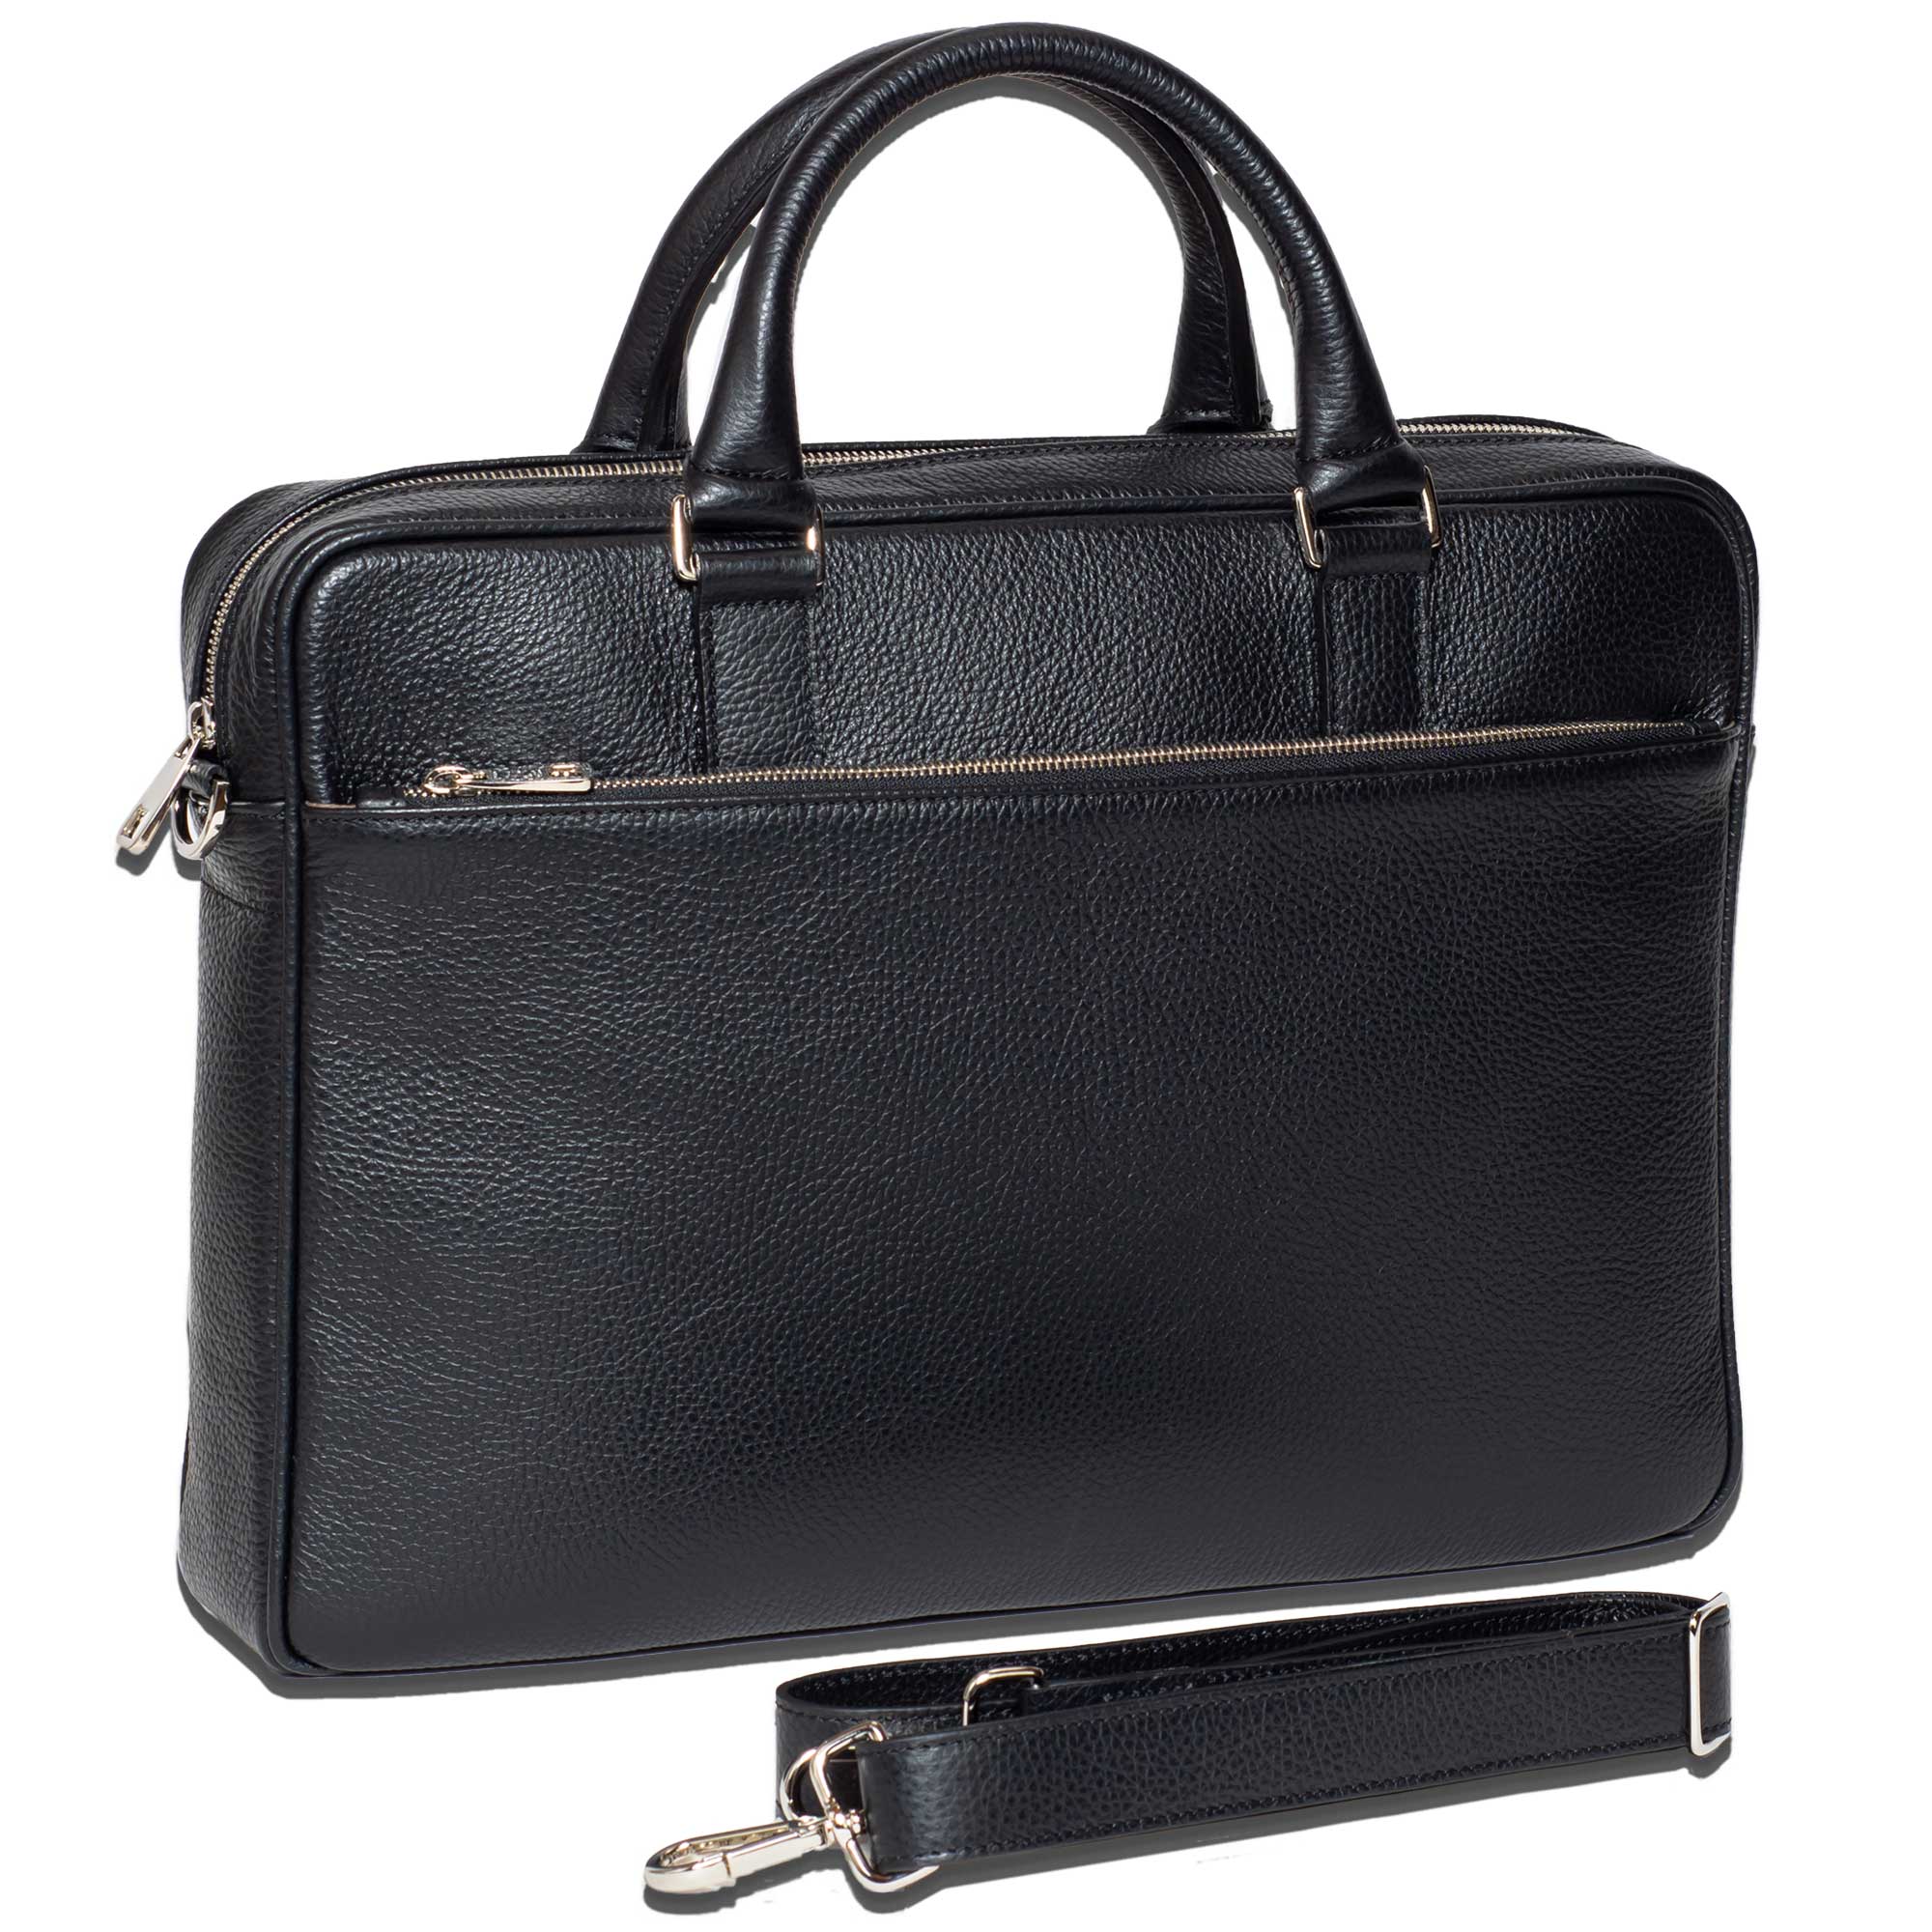 Slim Italian Leather Briefcase Made in Italy - Removable Shoulder Strap